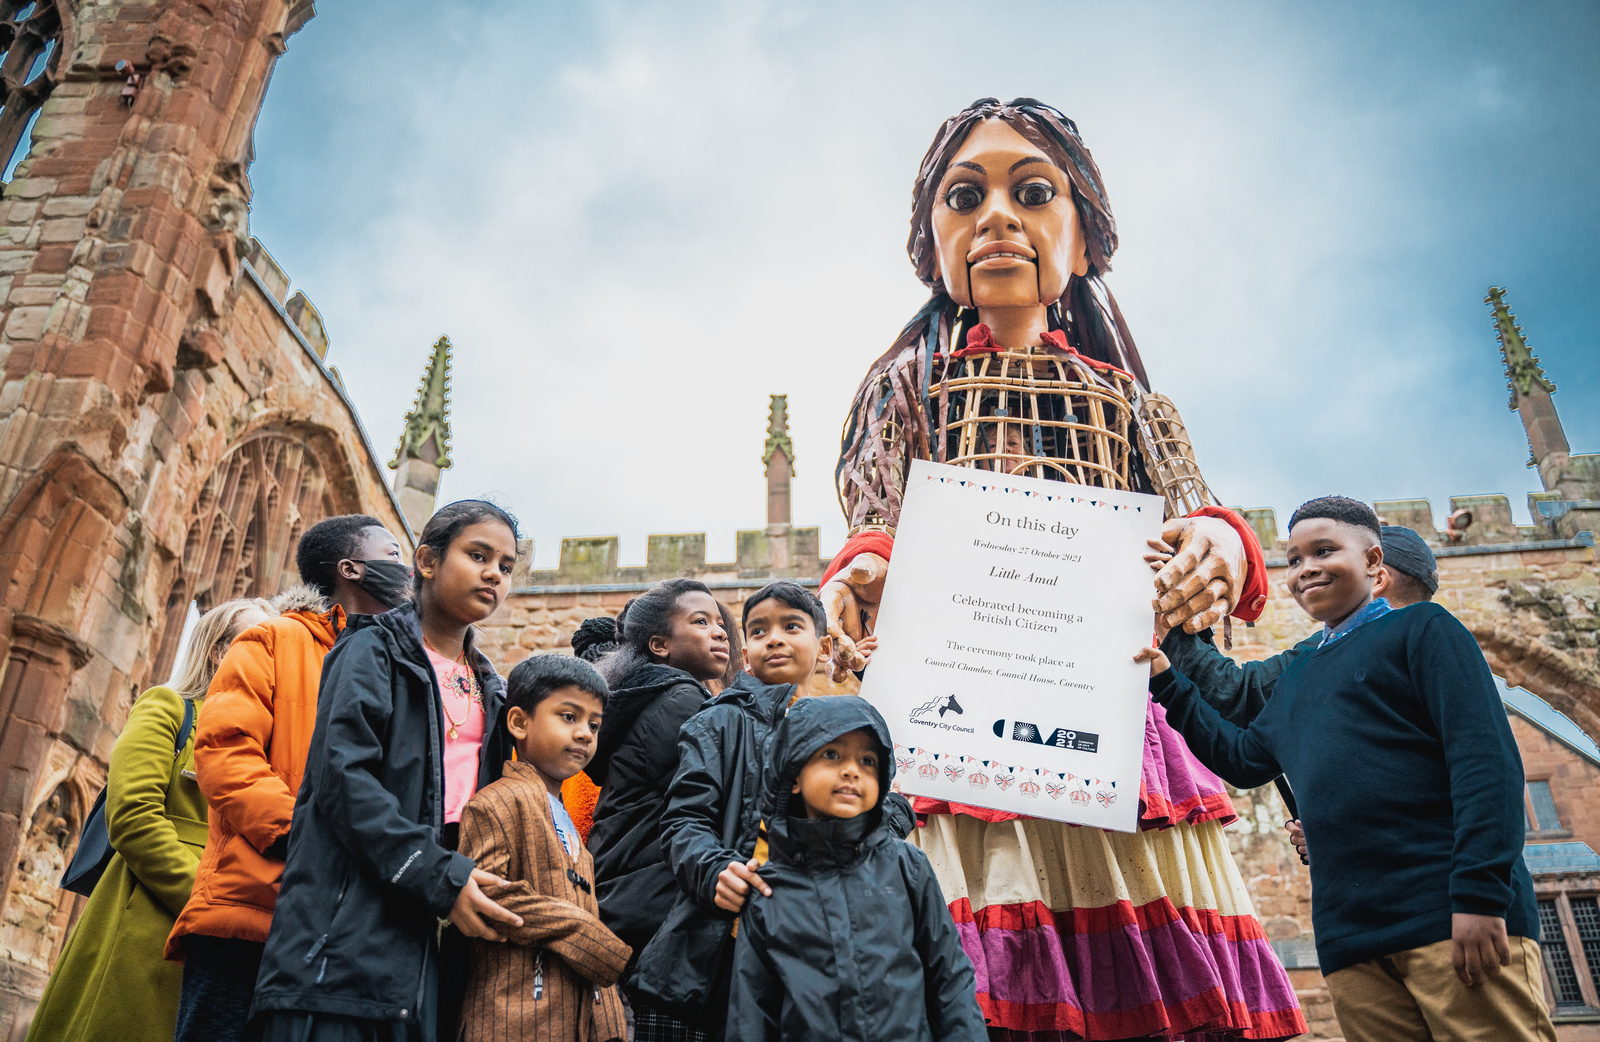 Over 2000 people came to welcome Little Amal to Coventry. In the afternoon, Amal attended the UK's first Children's Citizenship Ceremony and in the evening participated in an evening of performances.